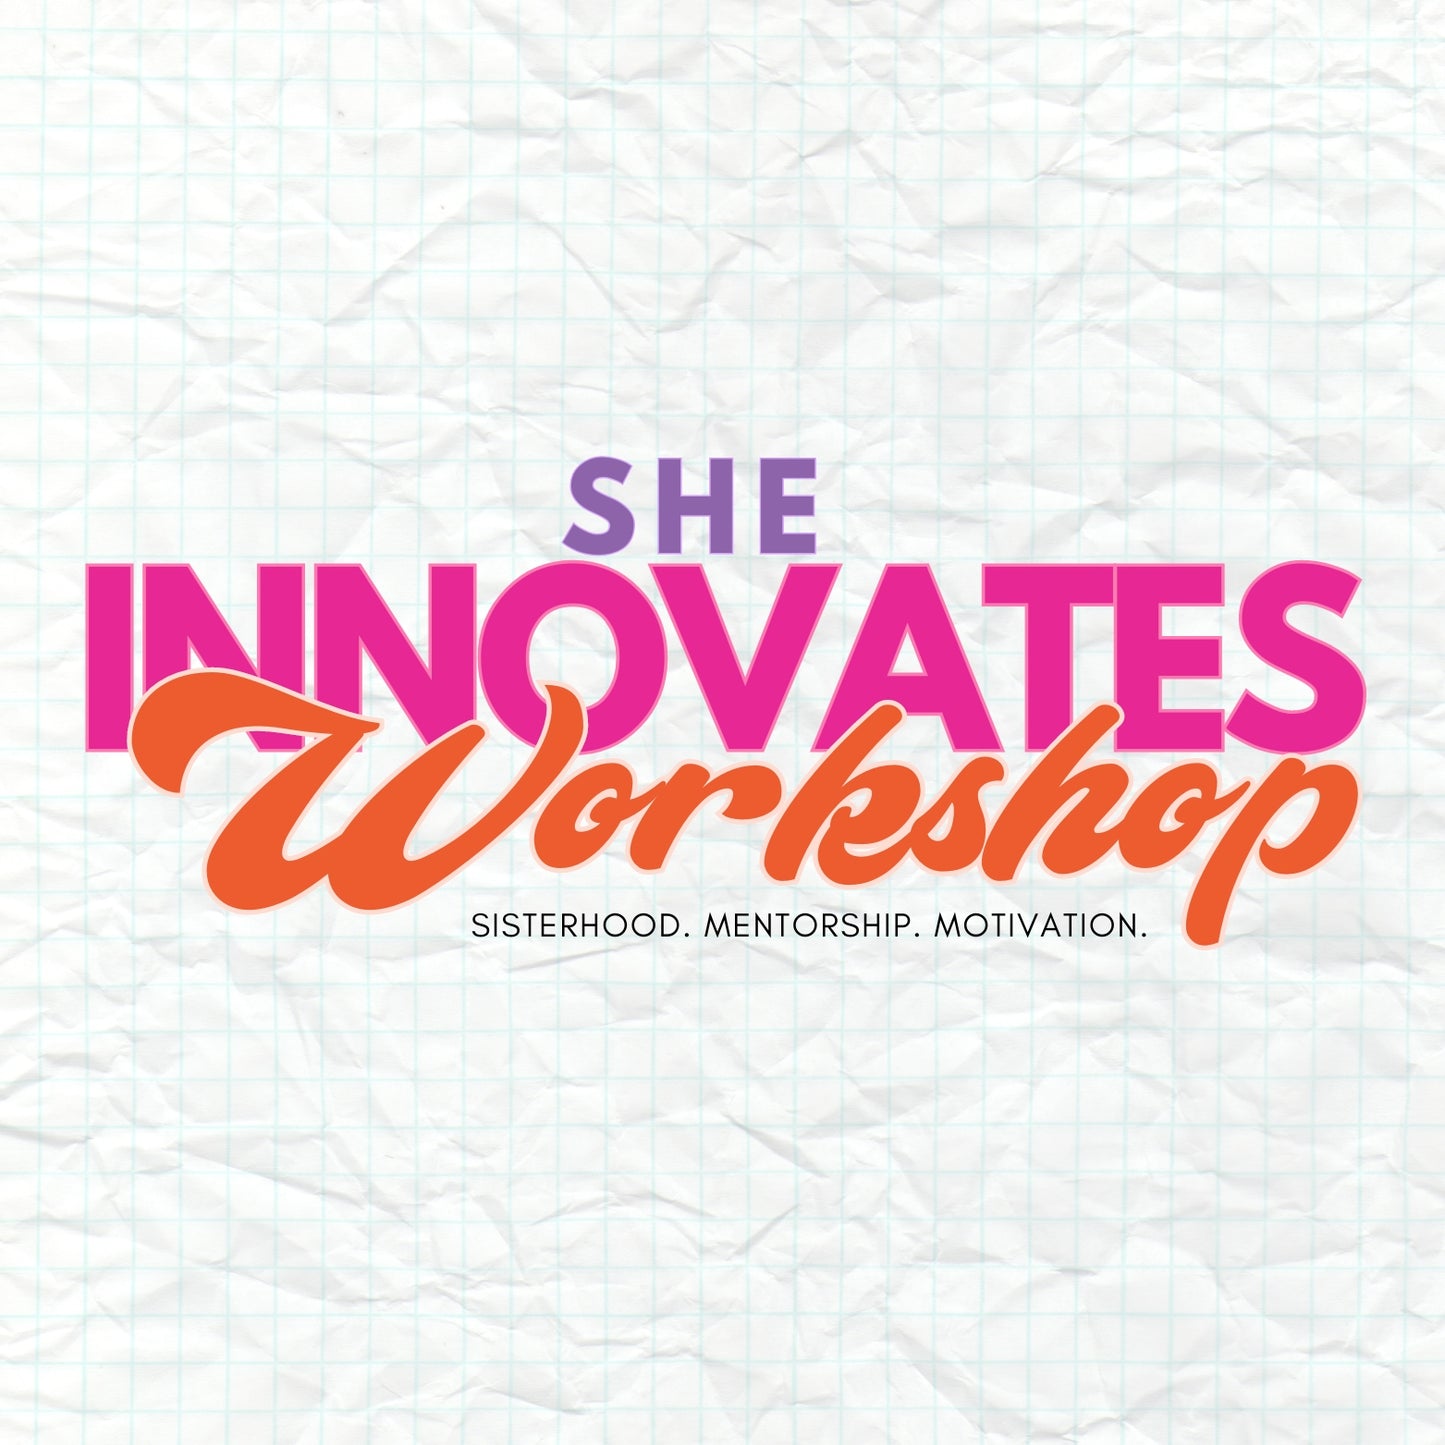 She Innovates Workshop Graphic Design Course